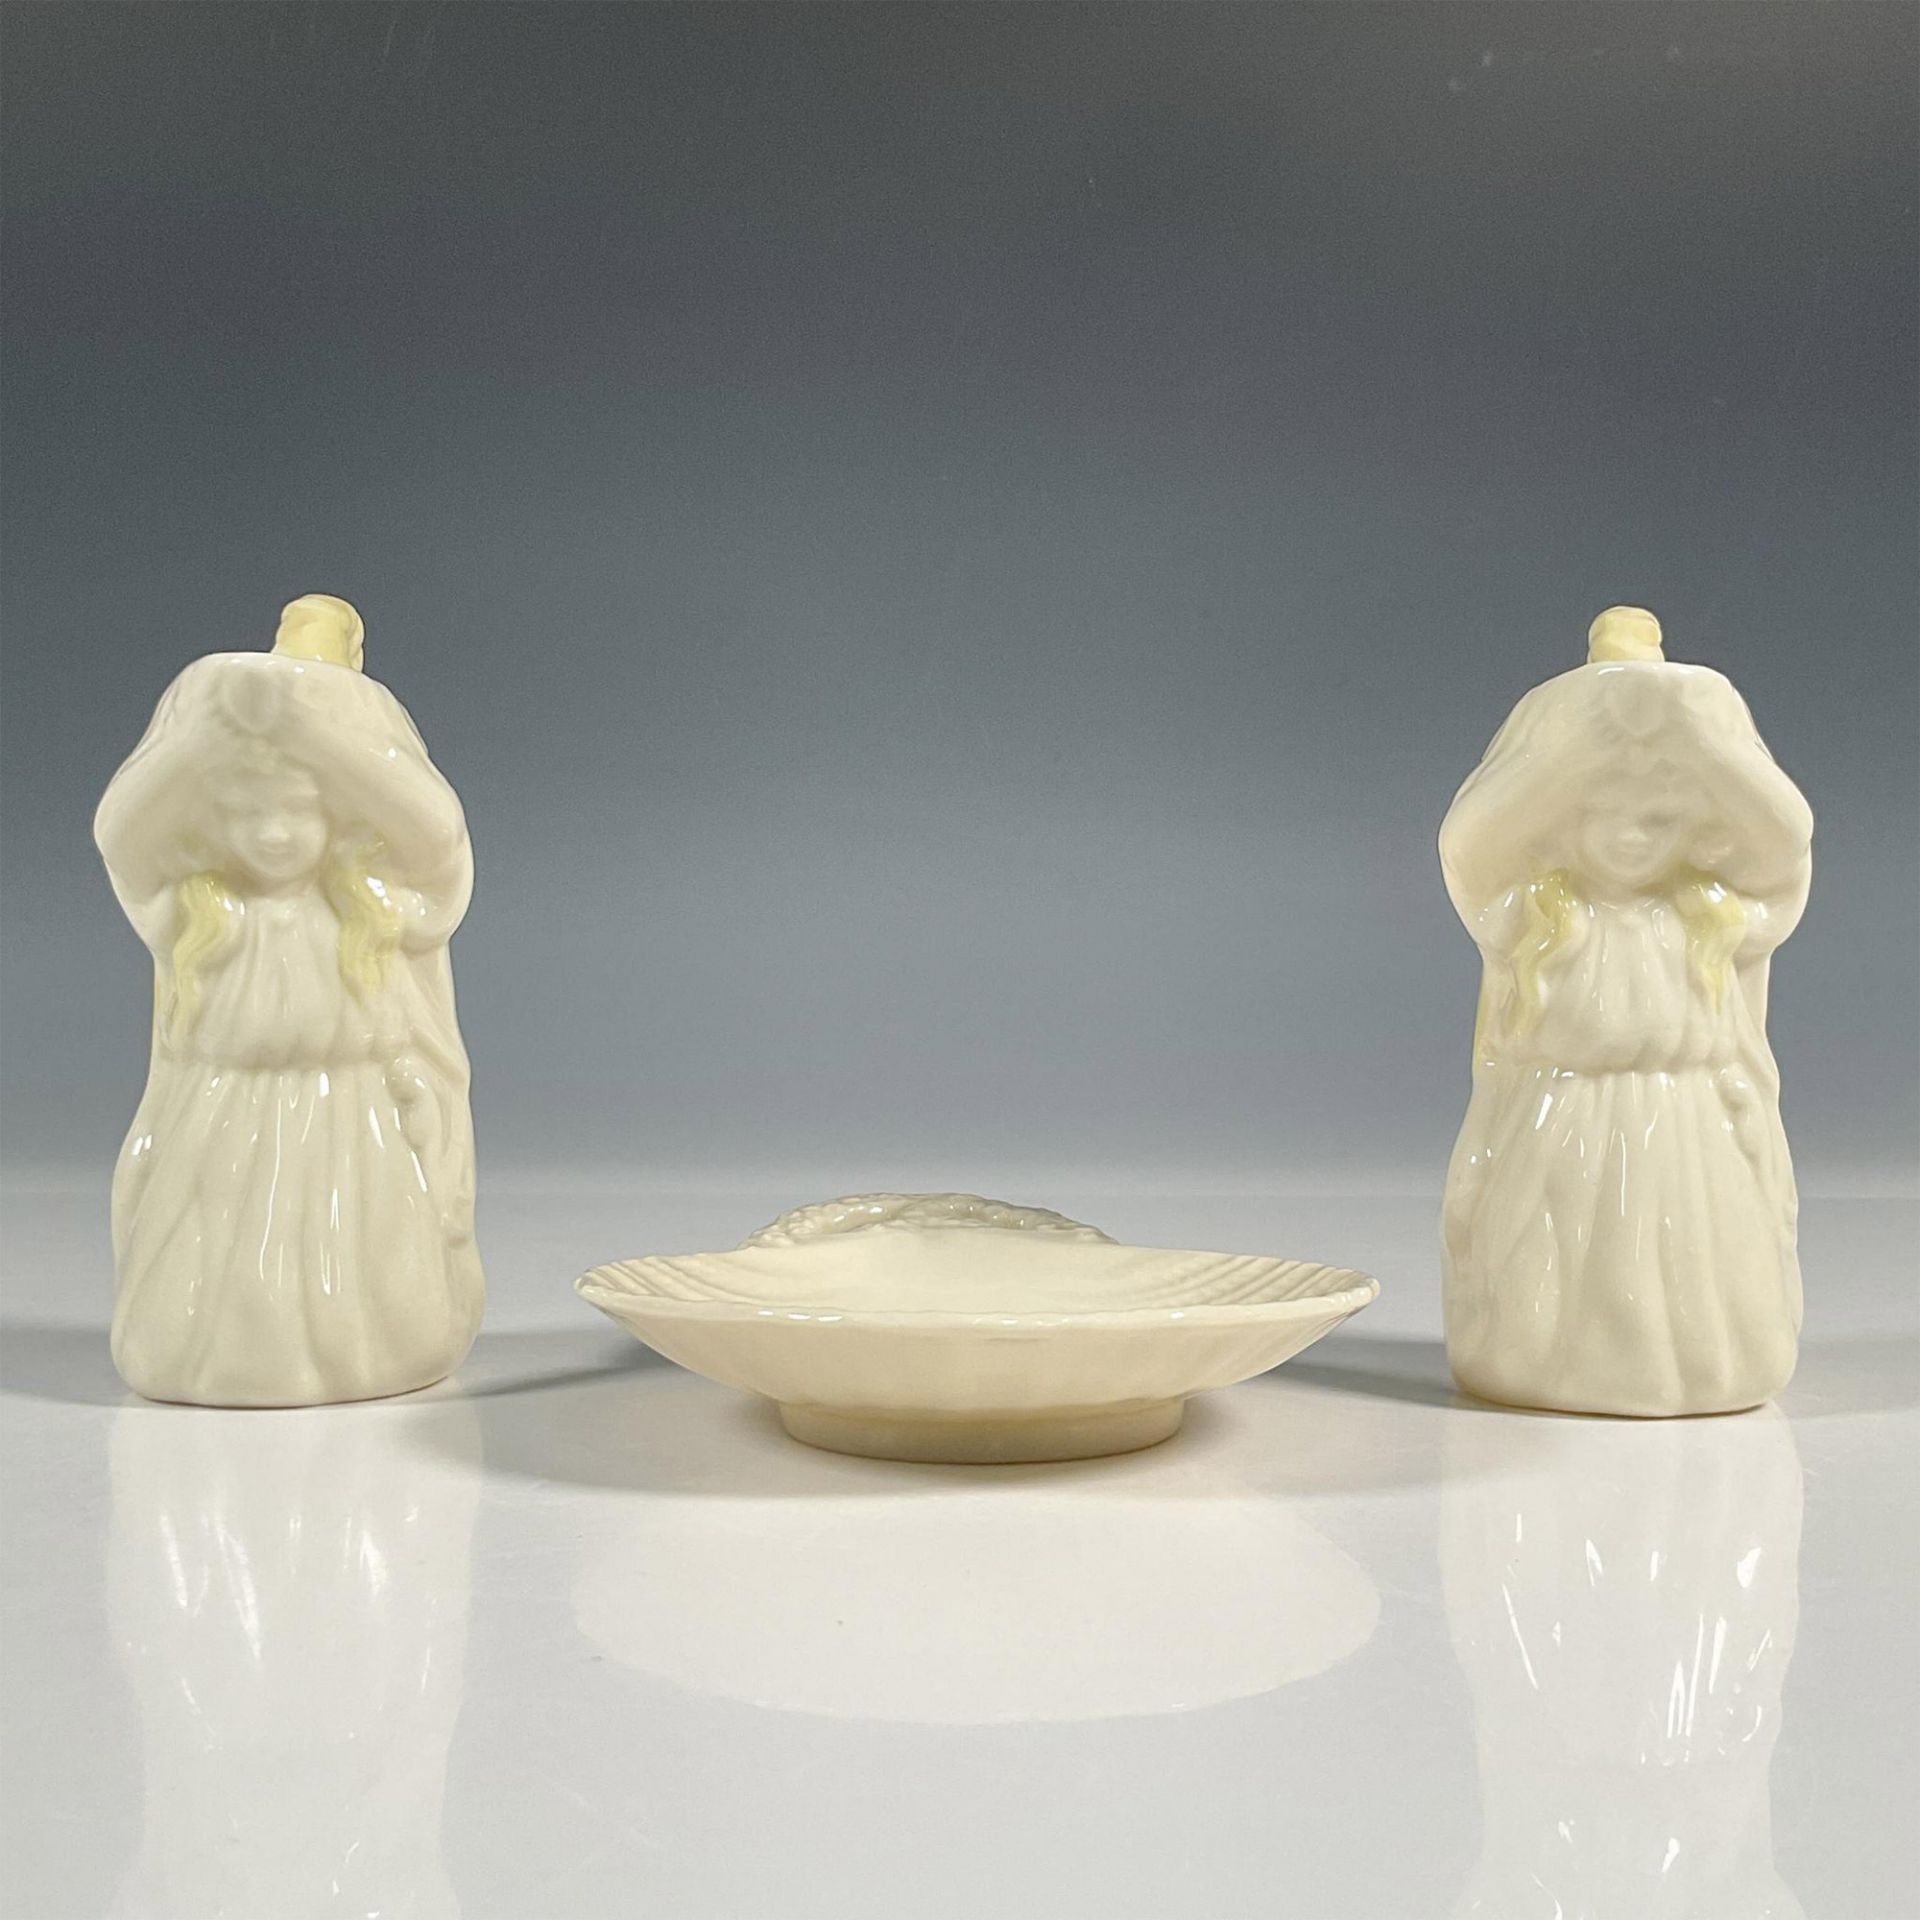 3pc Belleek Porcelain Creamers and Butter Dish